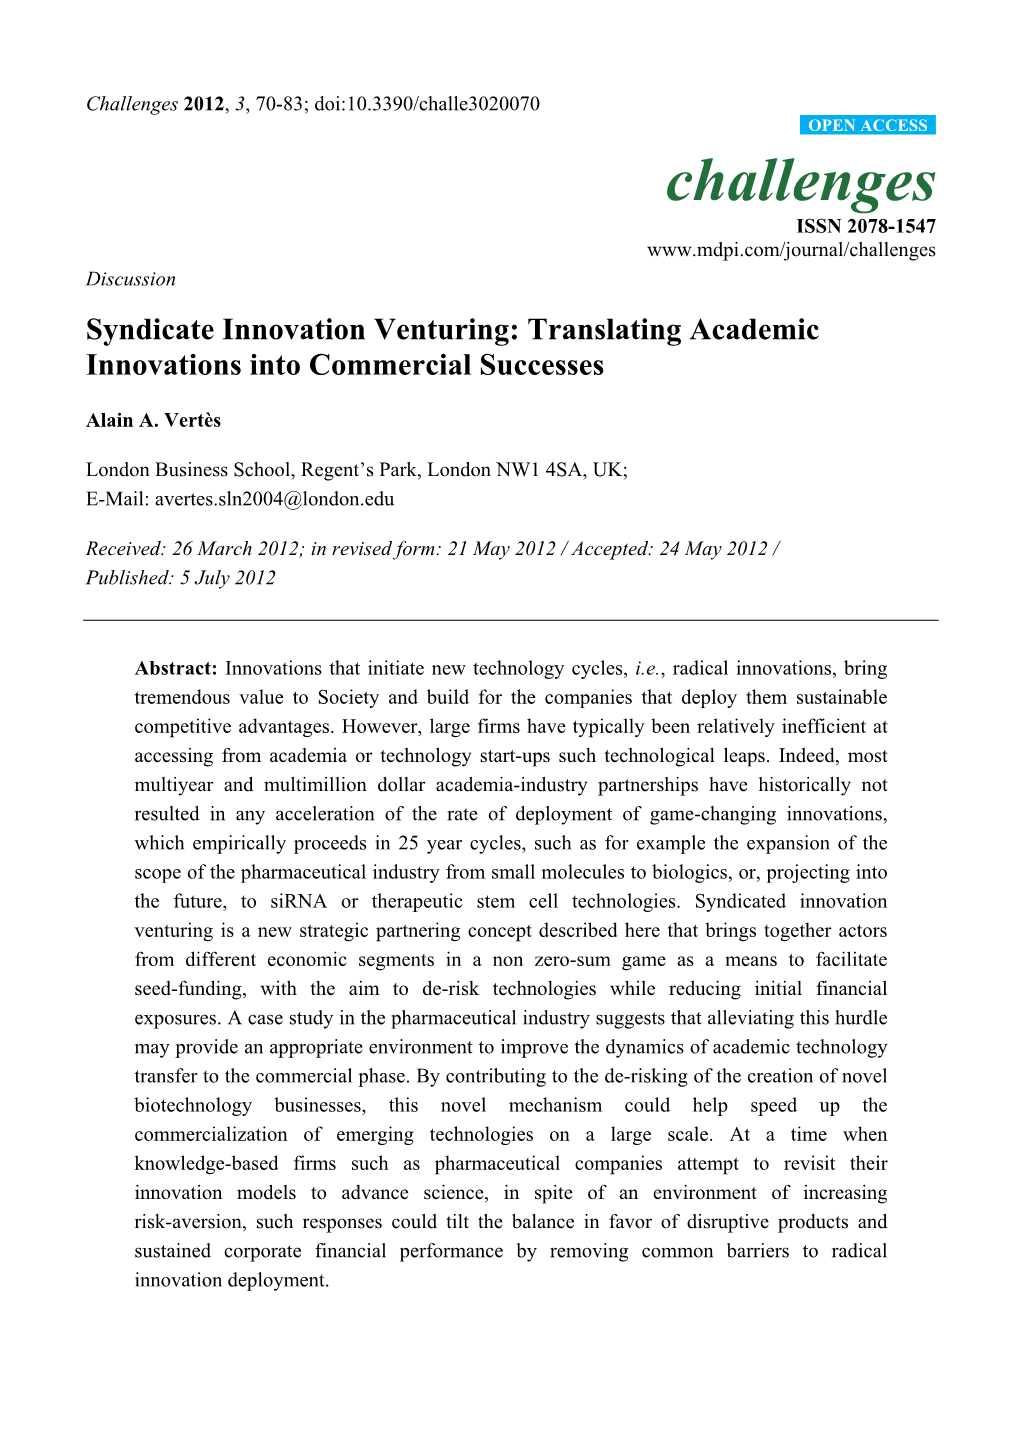 Syndicate Innovation Venturing: Translating Academic Innovations Into Commercial Successes